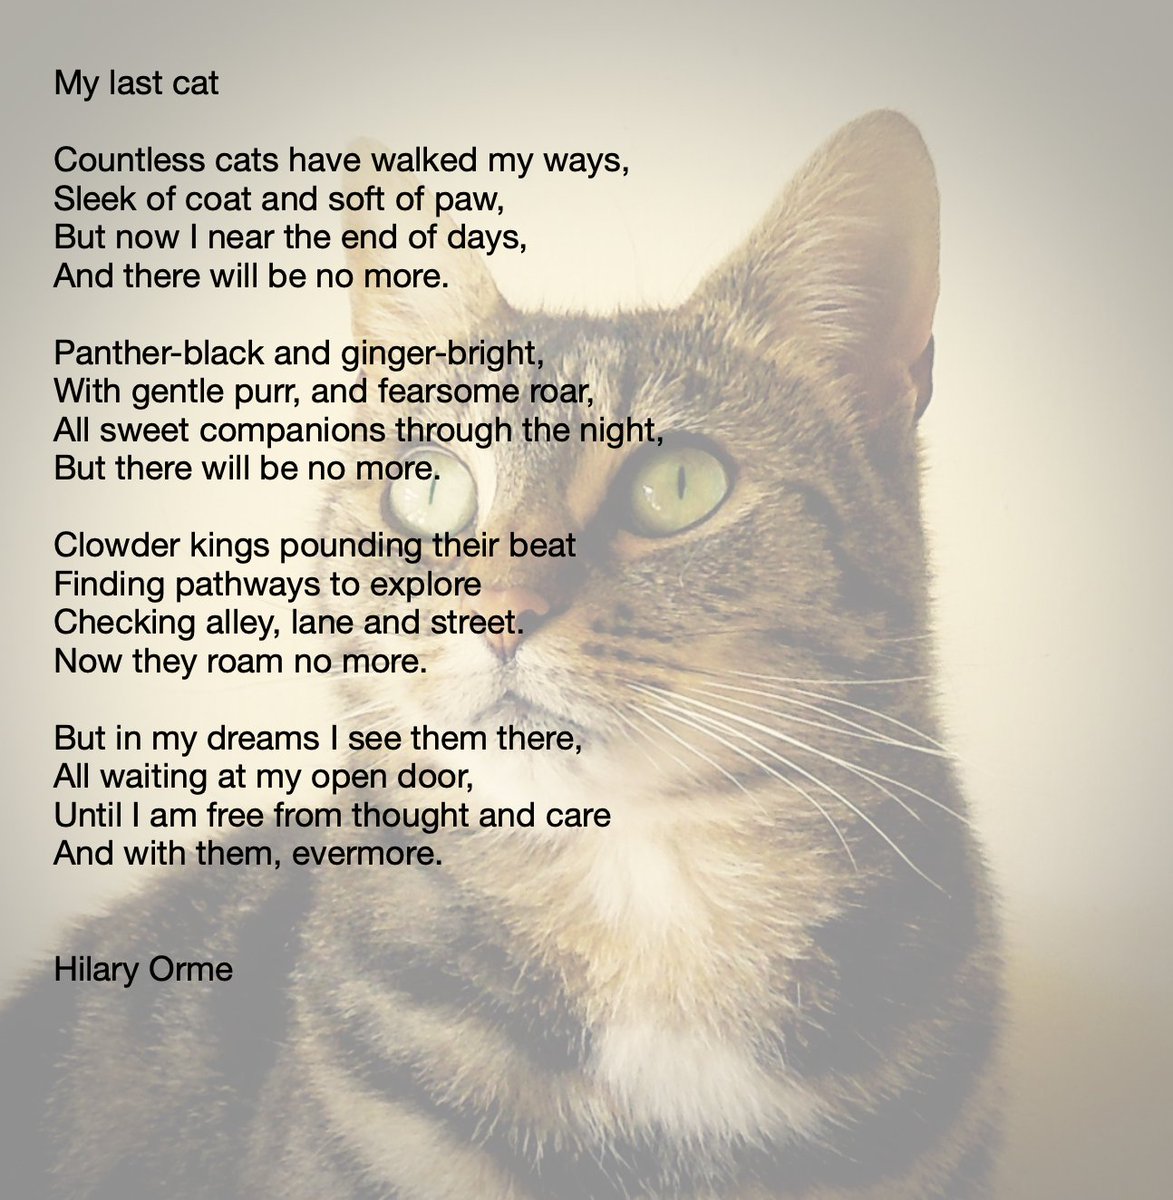 A while ago, we promised a new poem, and here it is. This is a special offering for #RainbowBridgeRemembranceDay.
Hugs and Best Fishes to all who have lost a dear fur-friend.
🤗🤗🐟🐠
#CatsOfTwitter 
#XCats